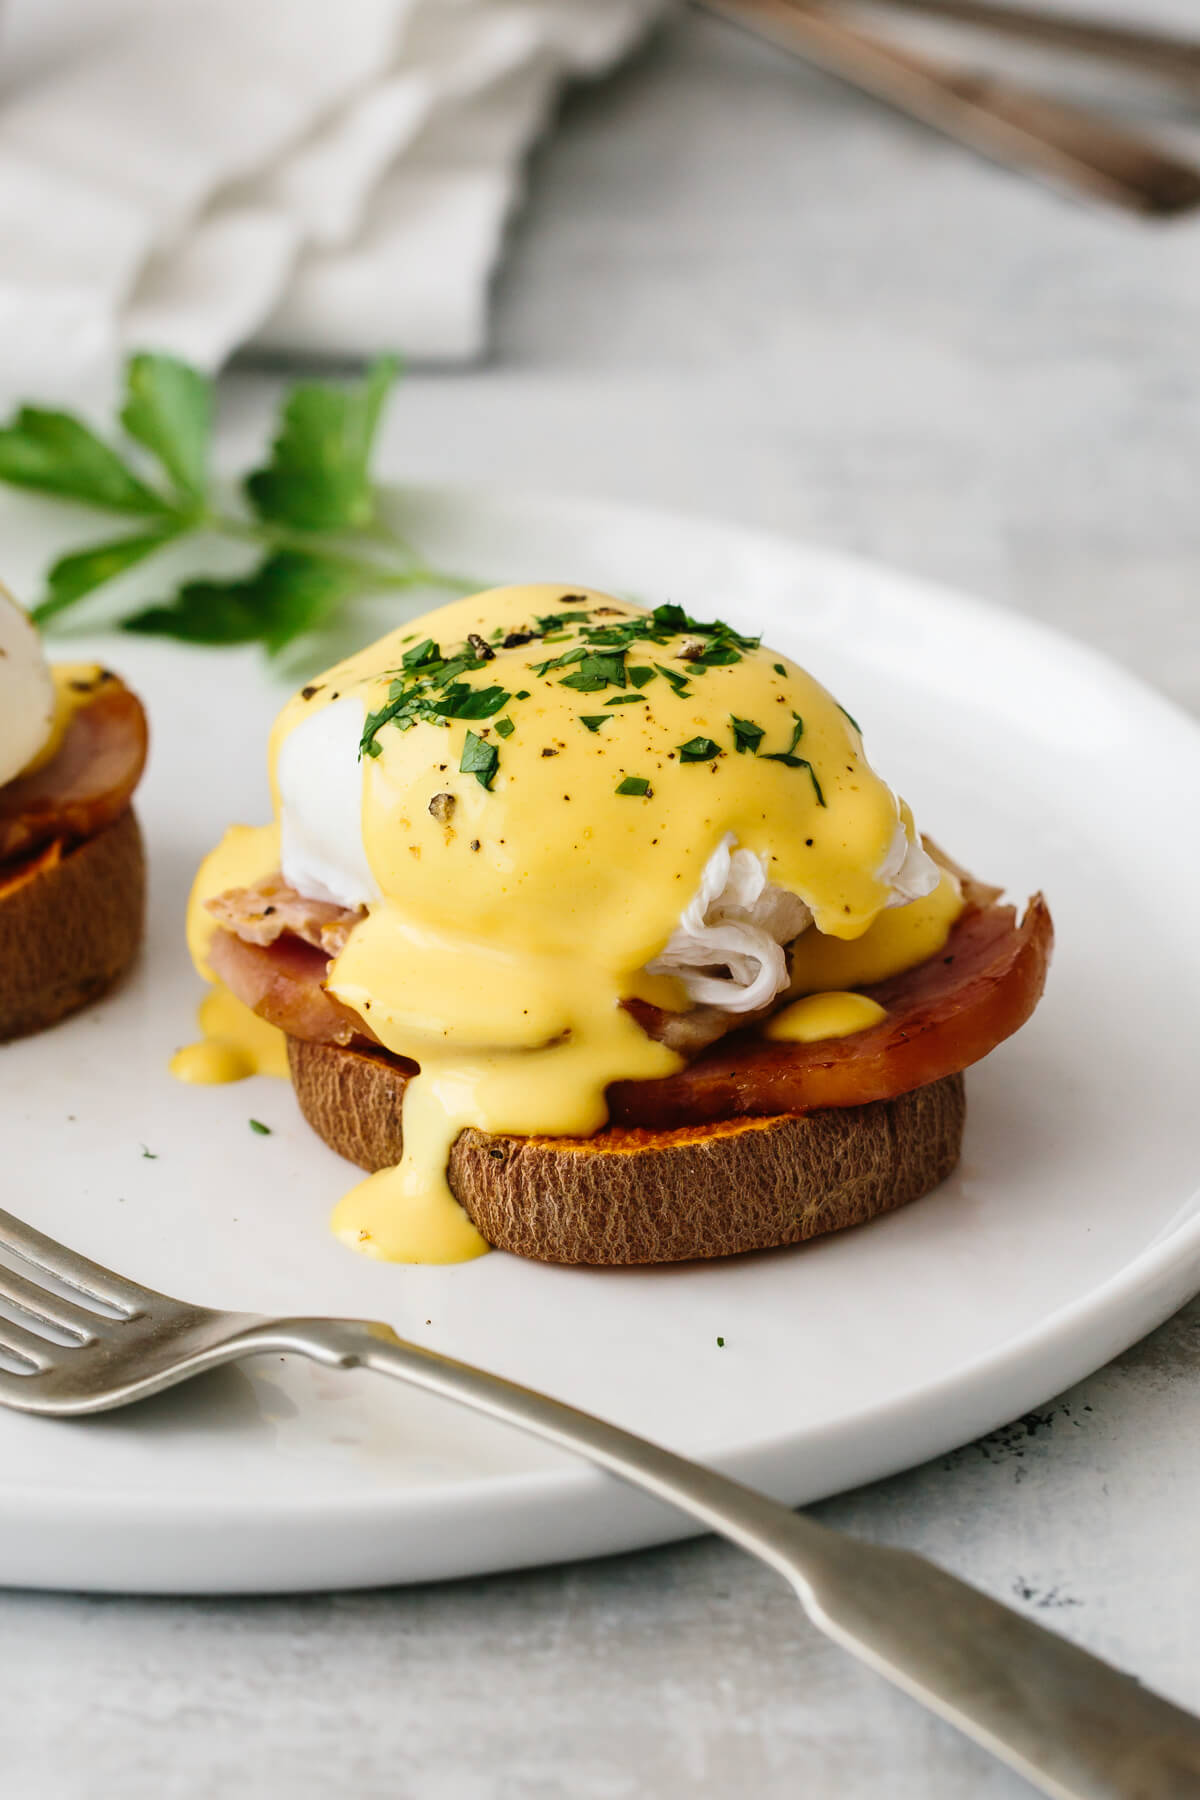 Healthy eggs benedict on a plate.